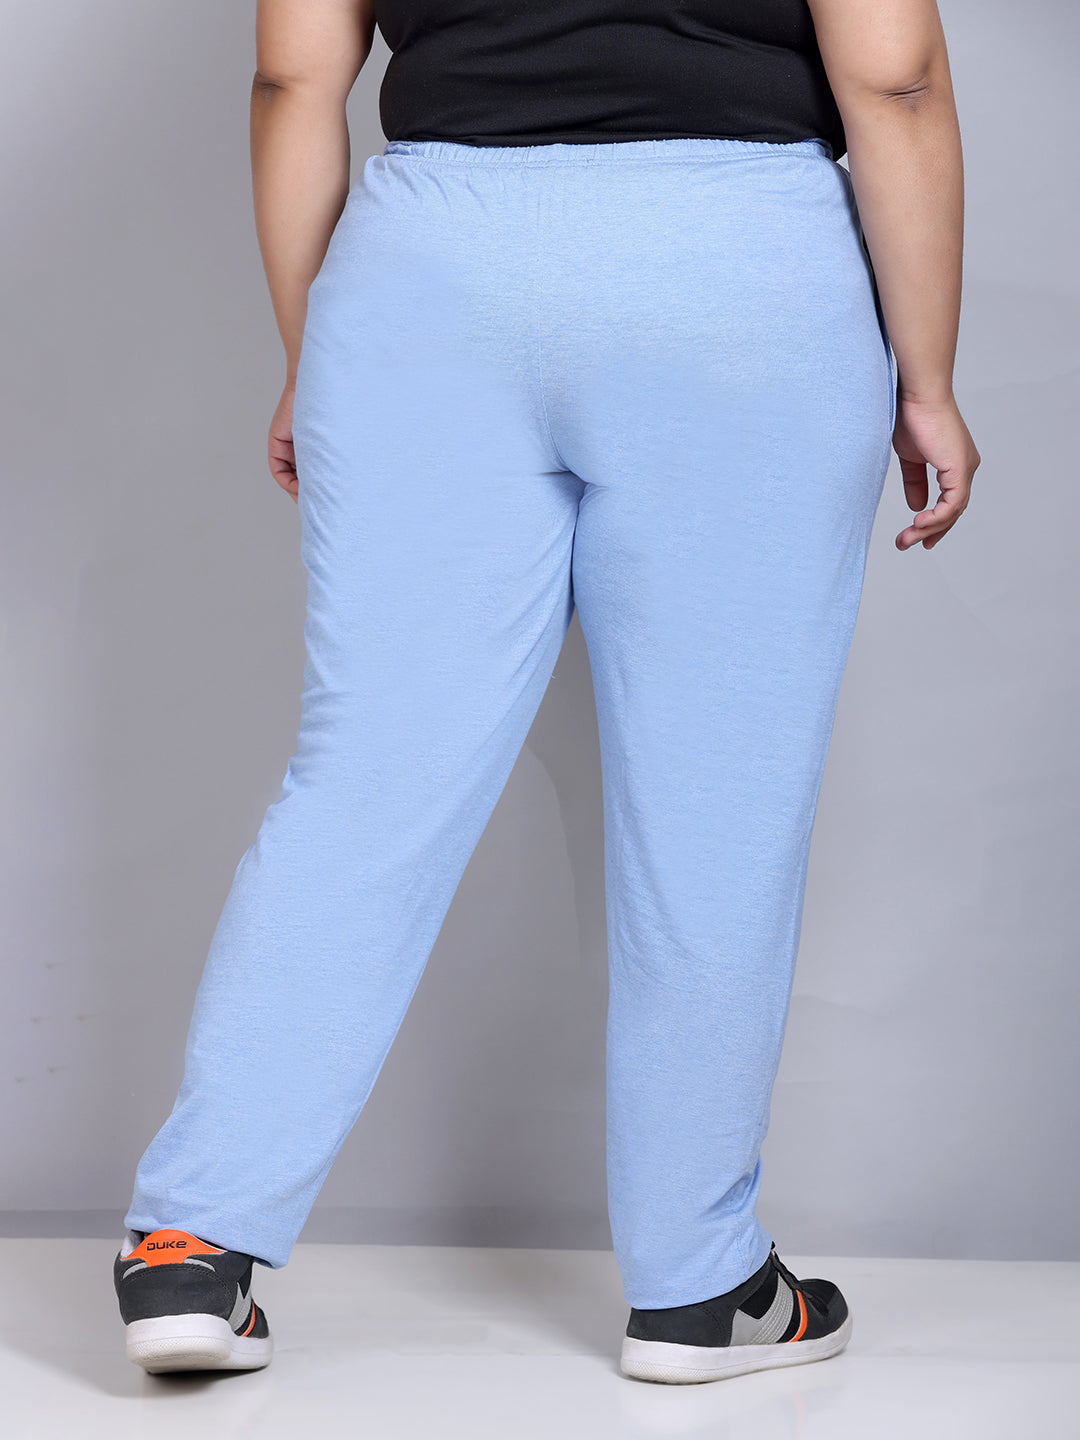 Comfy Sky Blue Cotton Plus Size Track Pants For Women At Best Prices